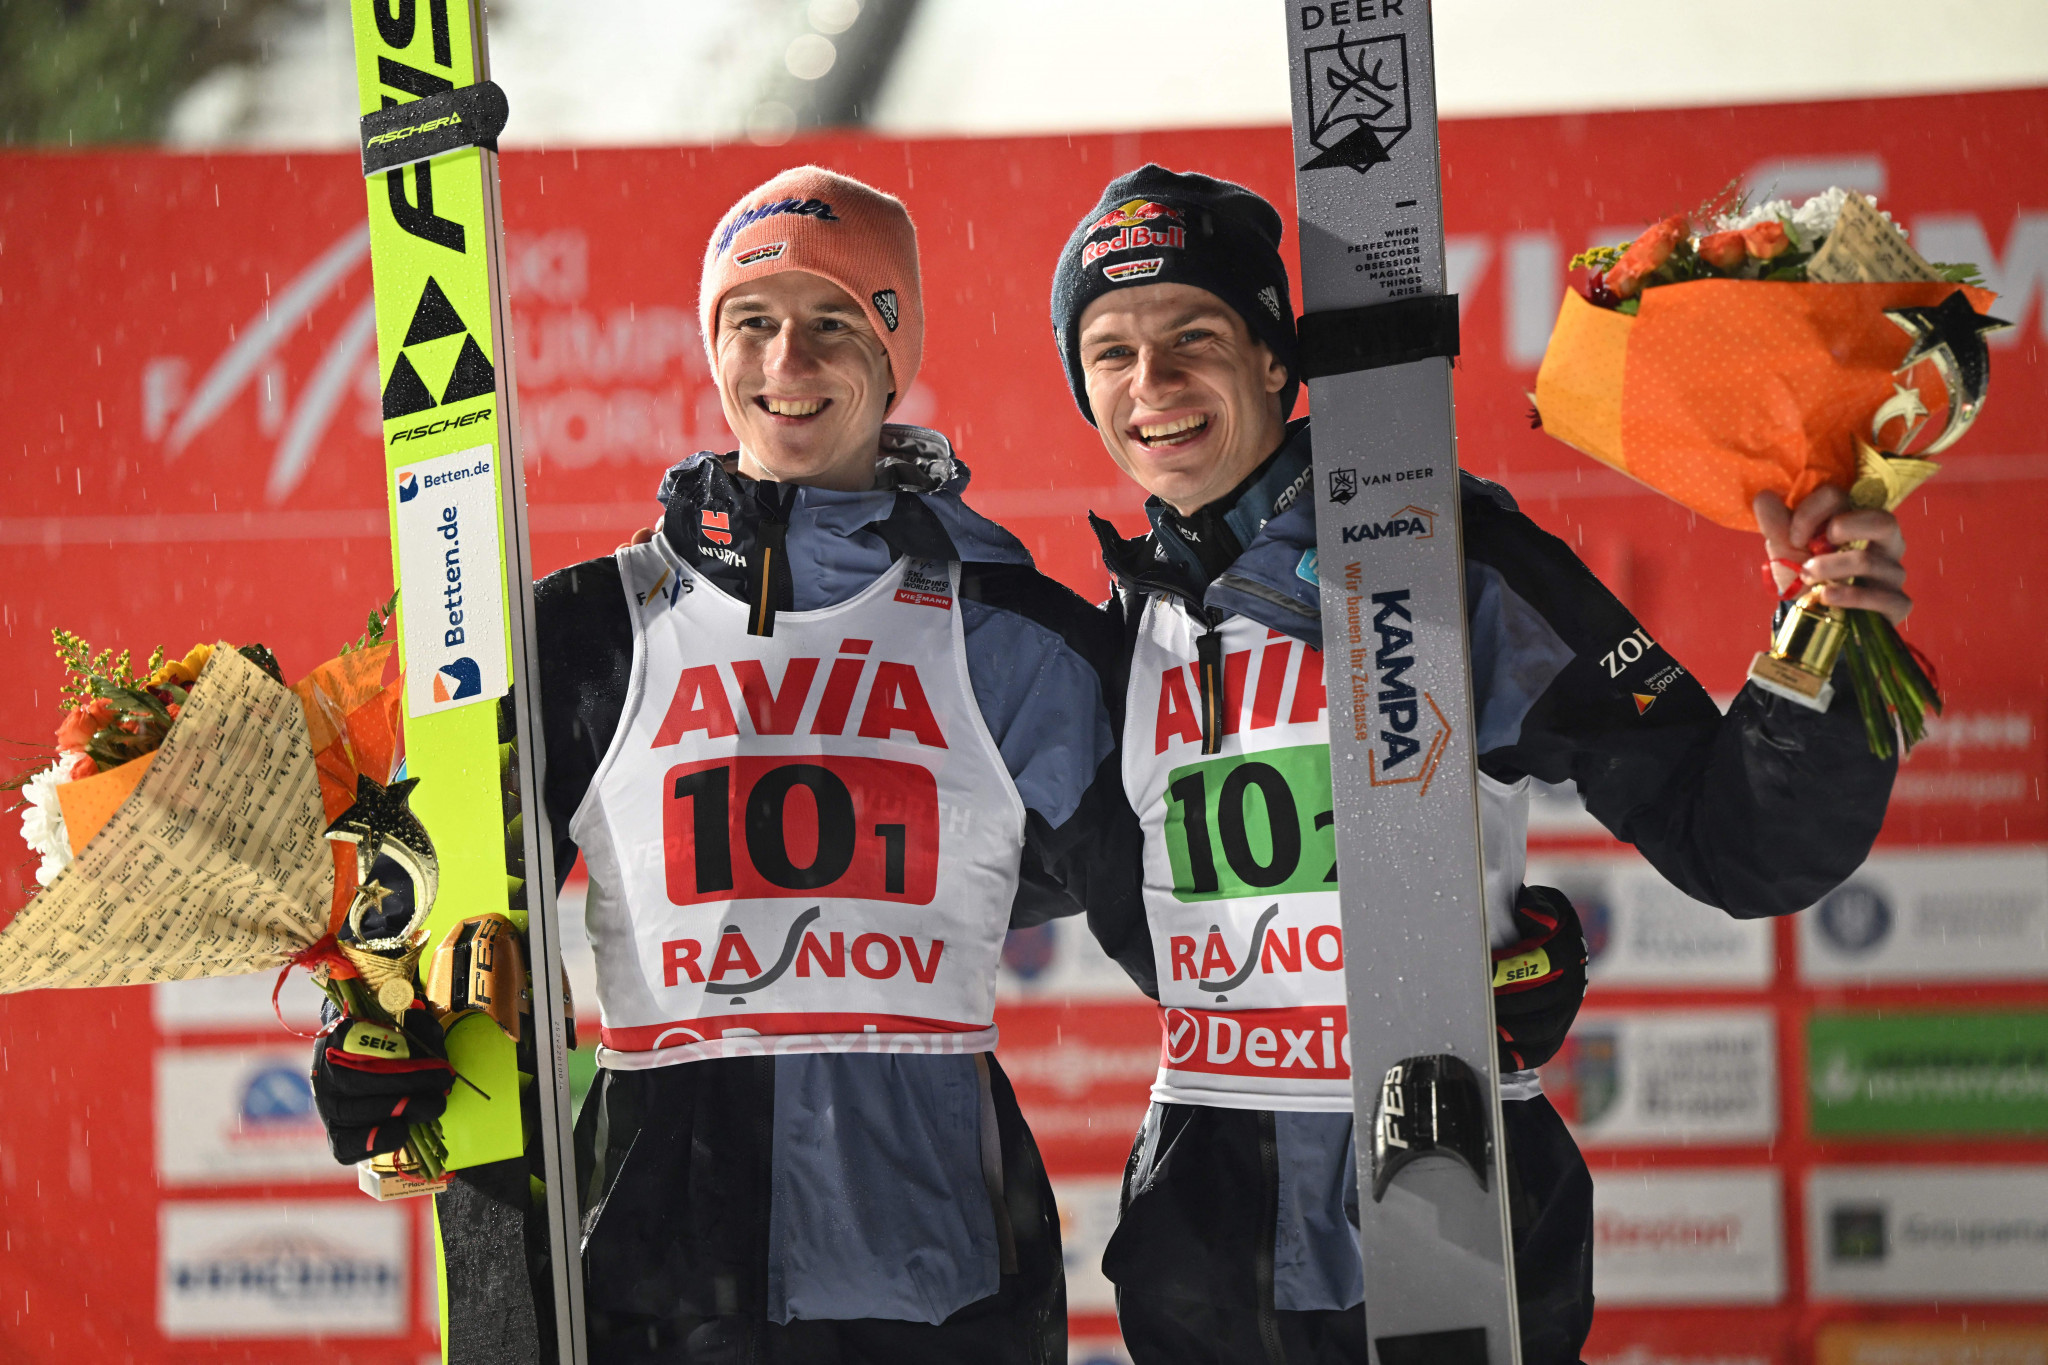 Geiger and Wellinger combat heavy rain to take FIS Ski Jumping World Cup win